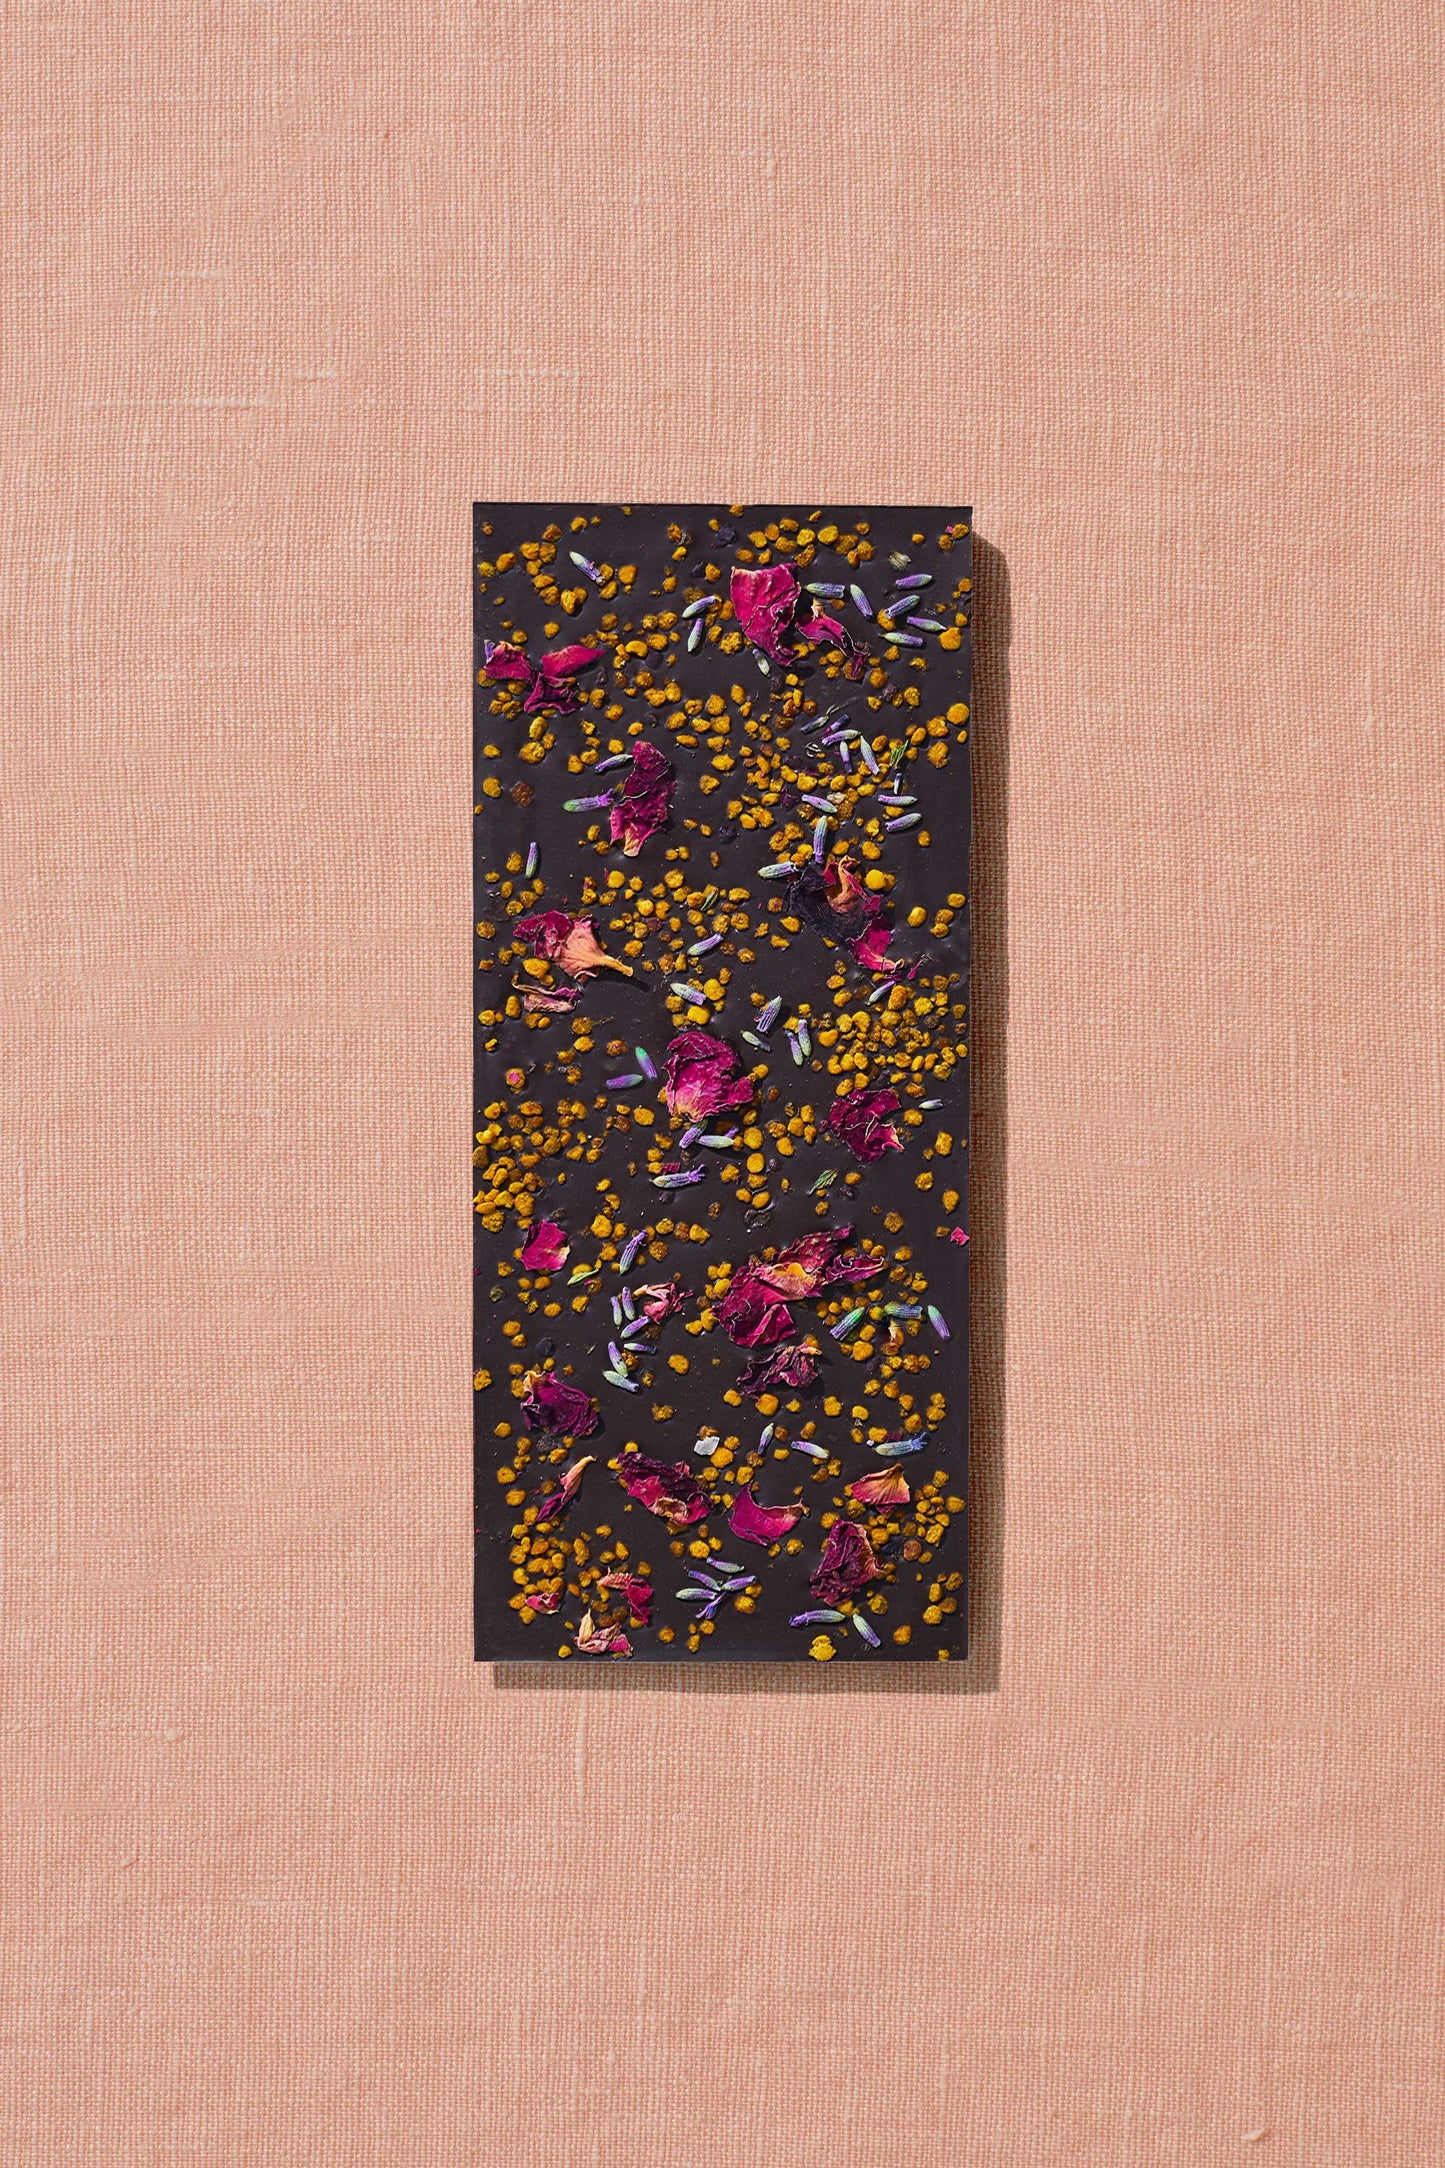 spring & mulberry / date-sweetened chocolate - lavender, bee pollen, rose petal